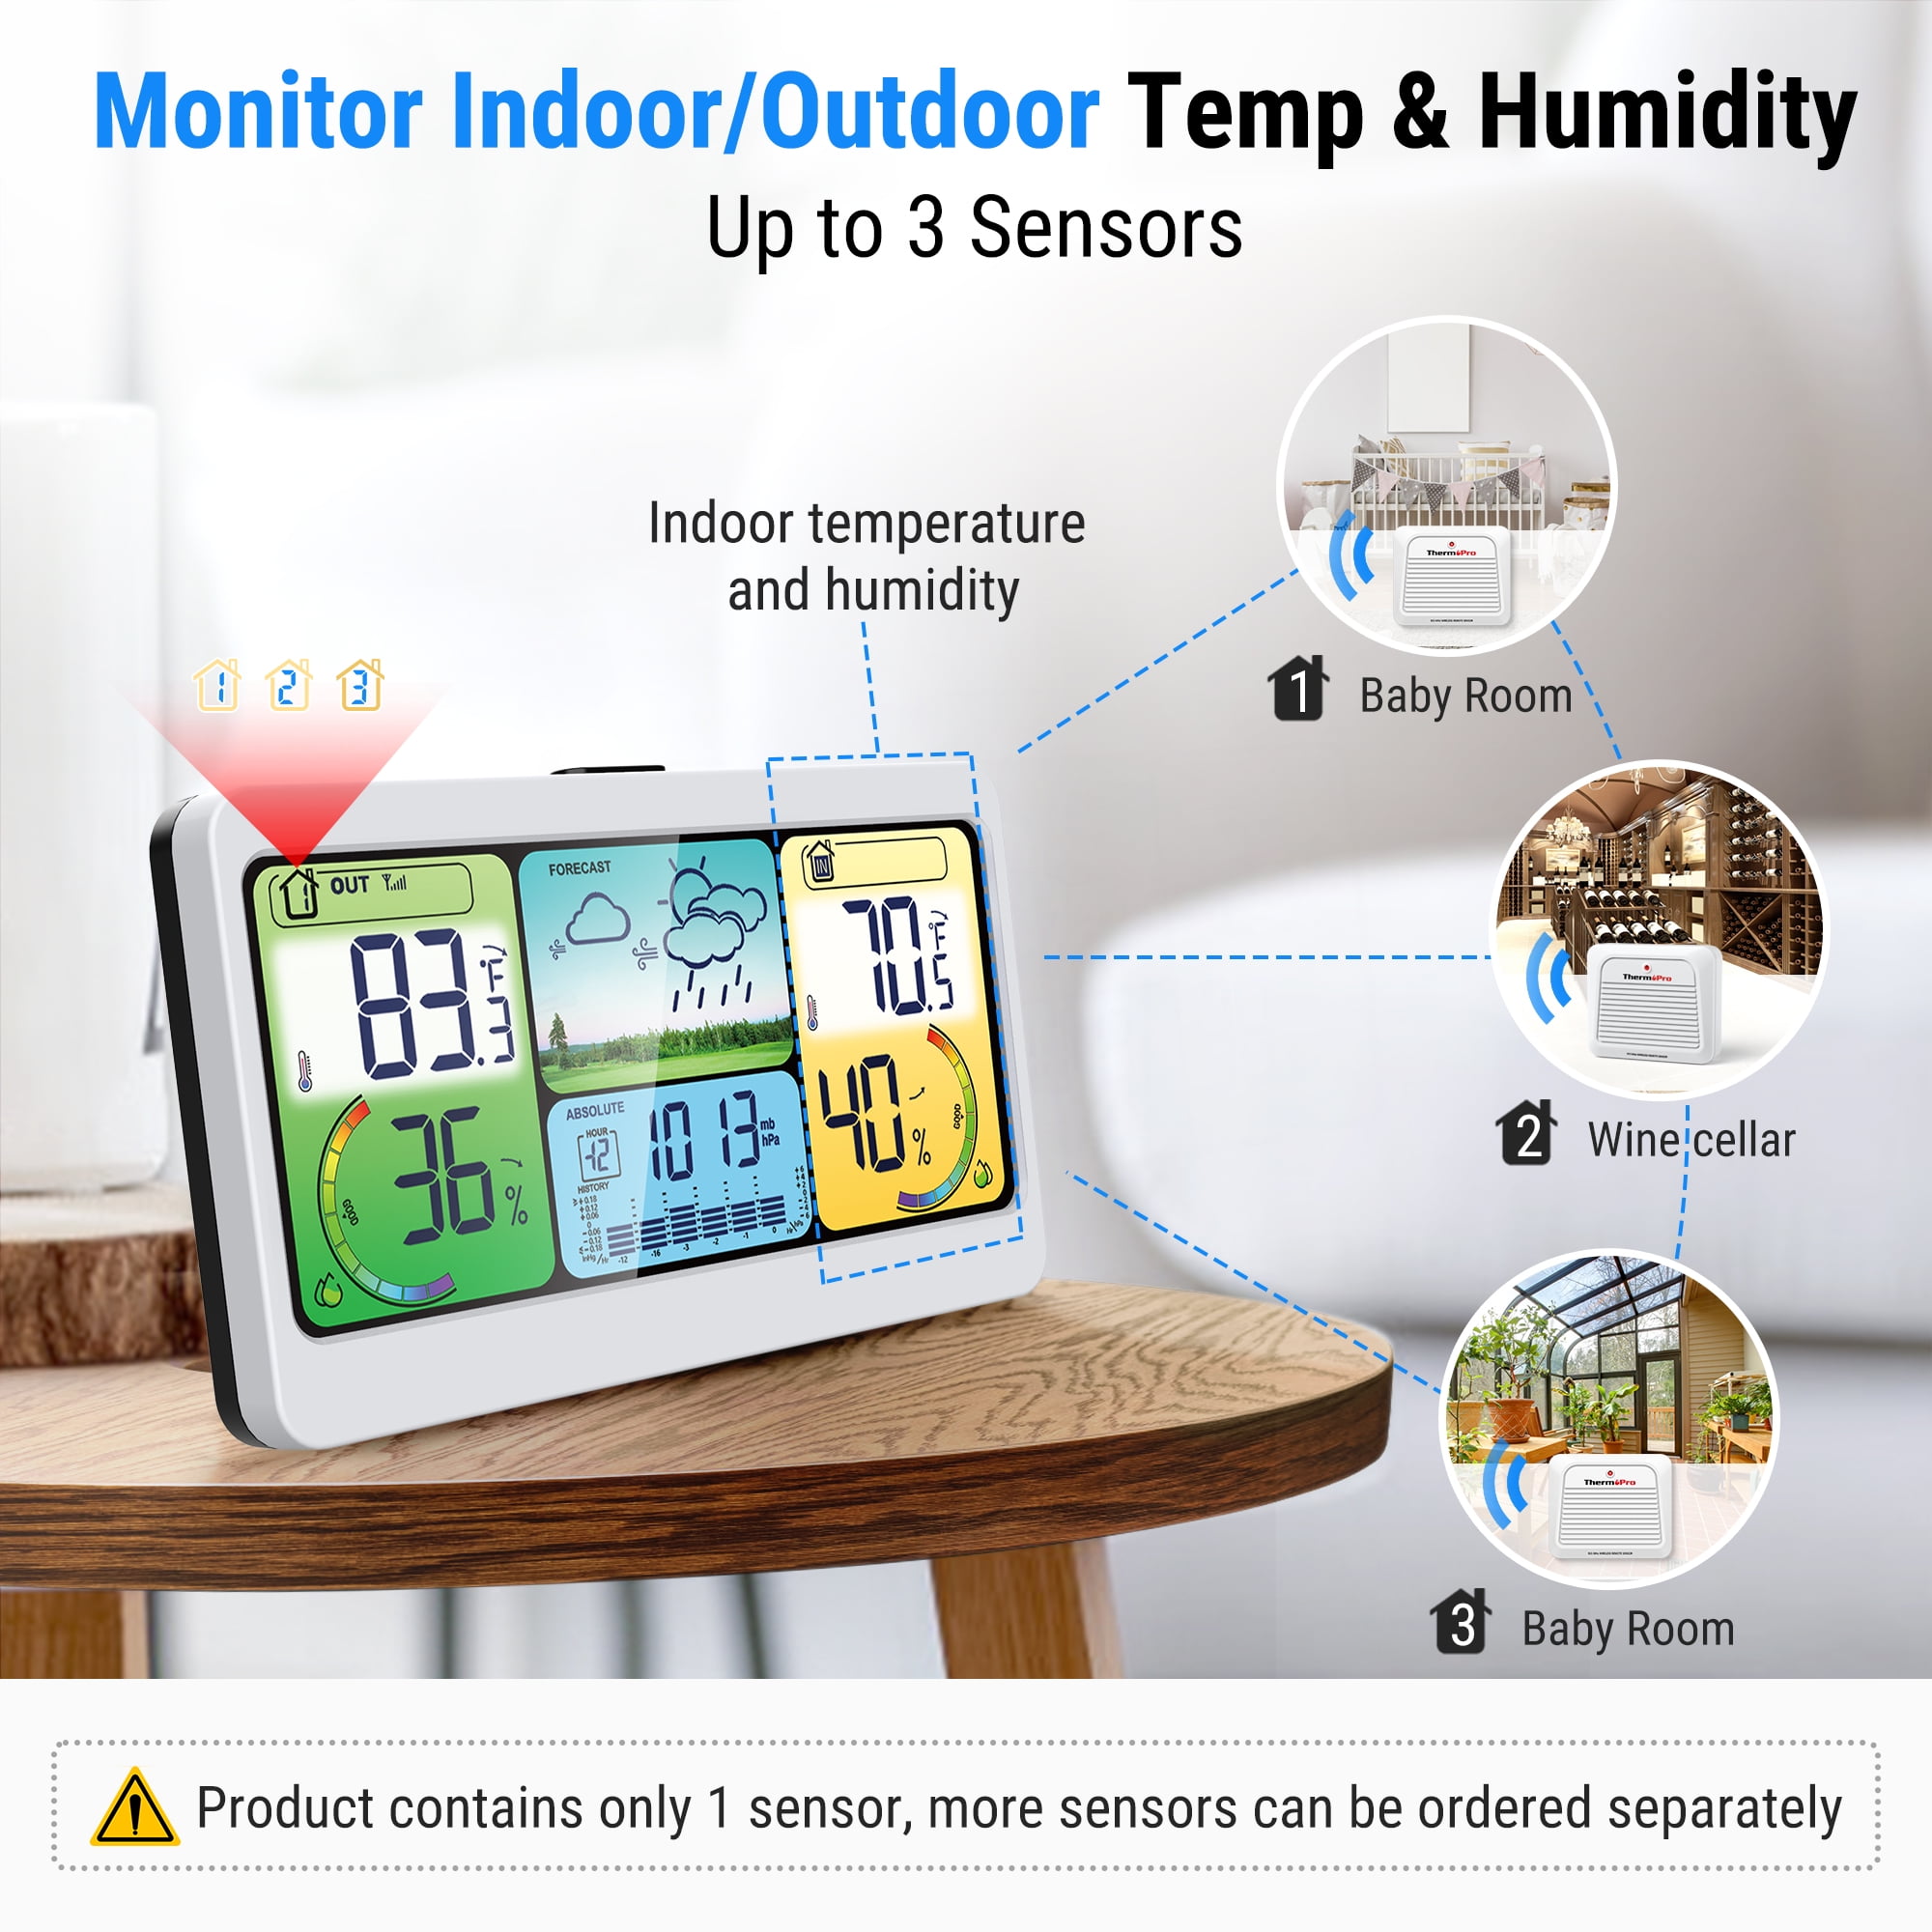 TempPro B68B Weather Station Indoor Outdoor Thermometer 500ft Wireless Home  Weather Station with Digital Temperature Humidity Meter for Weather